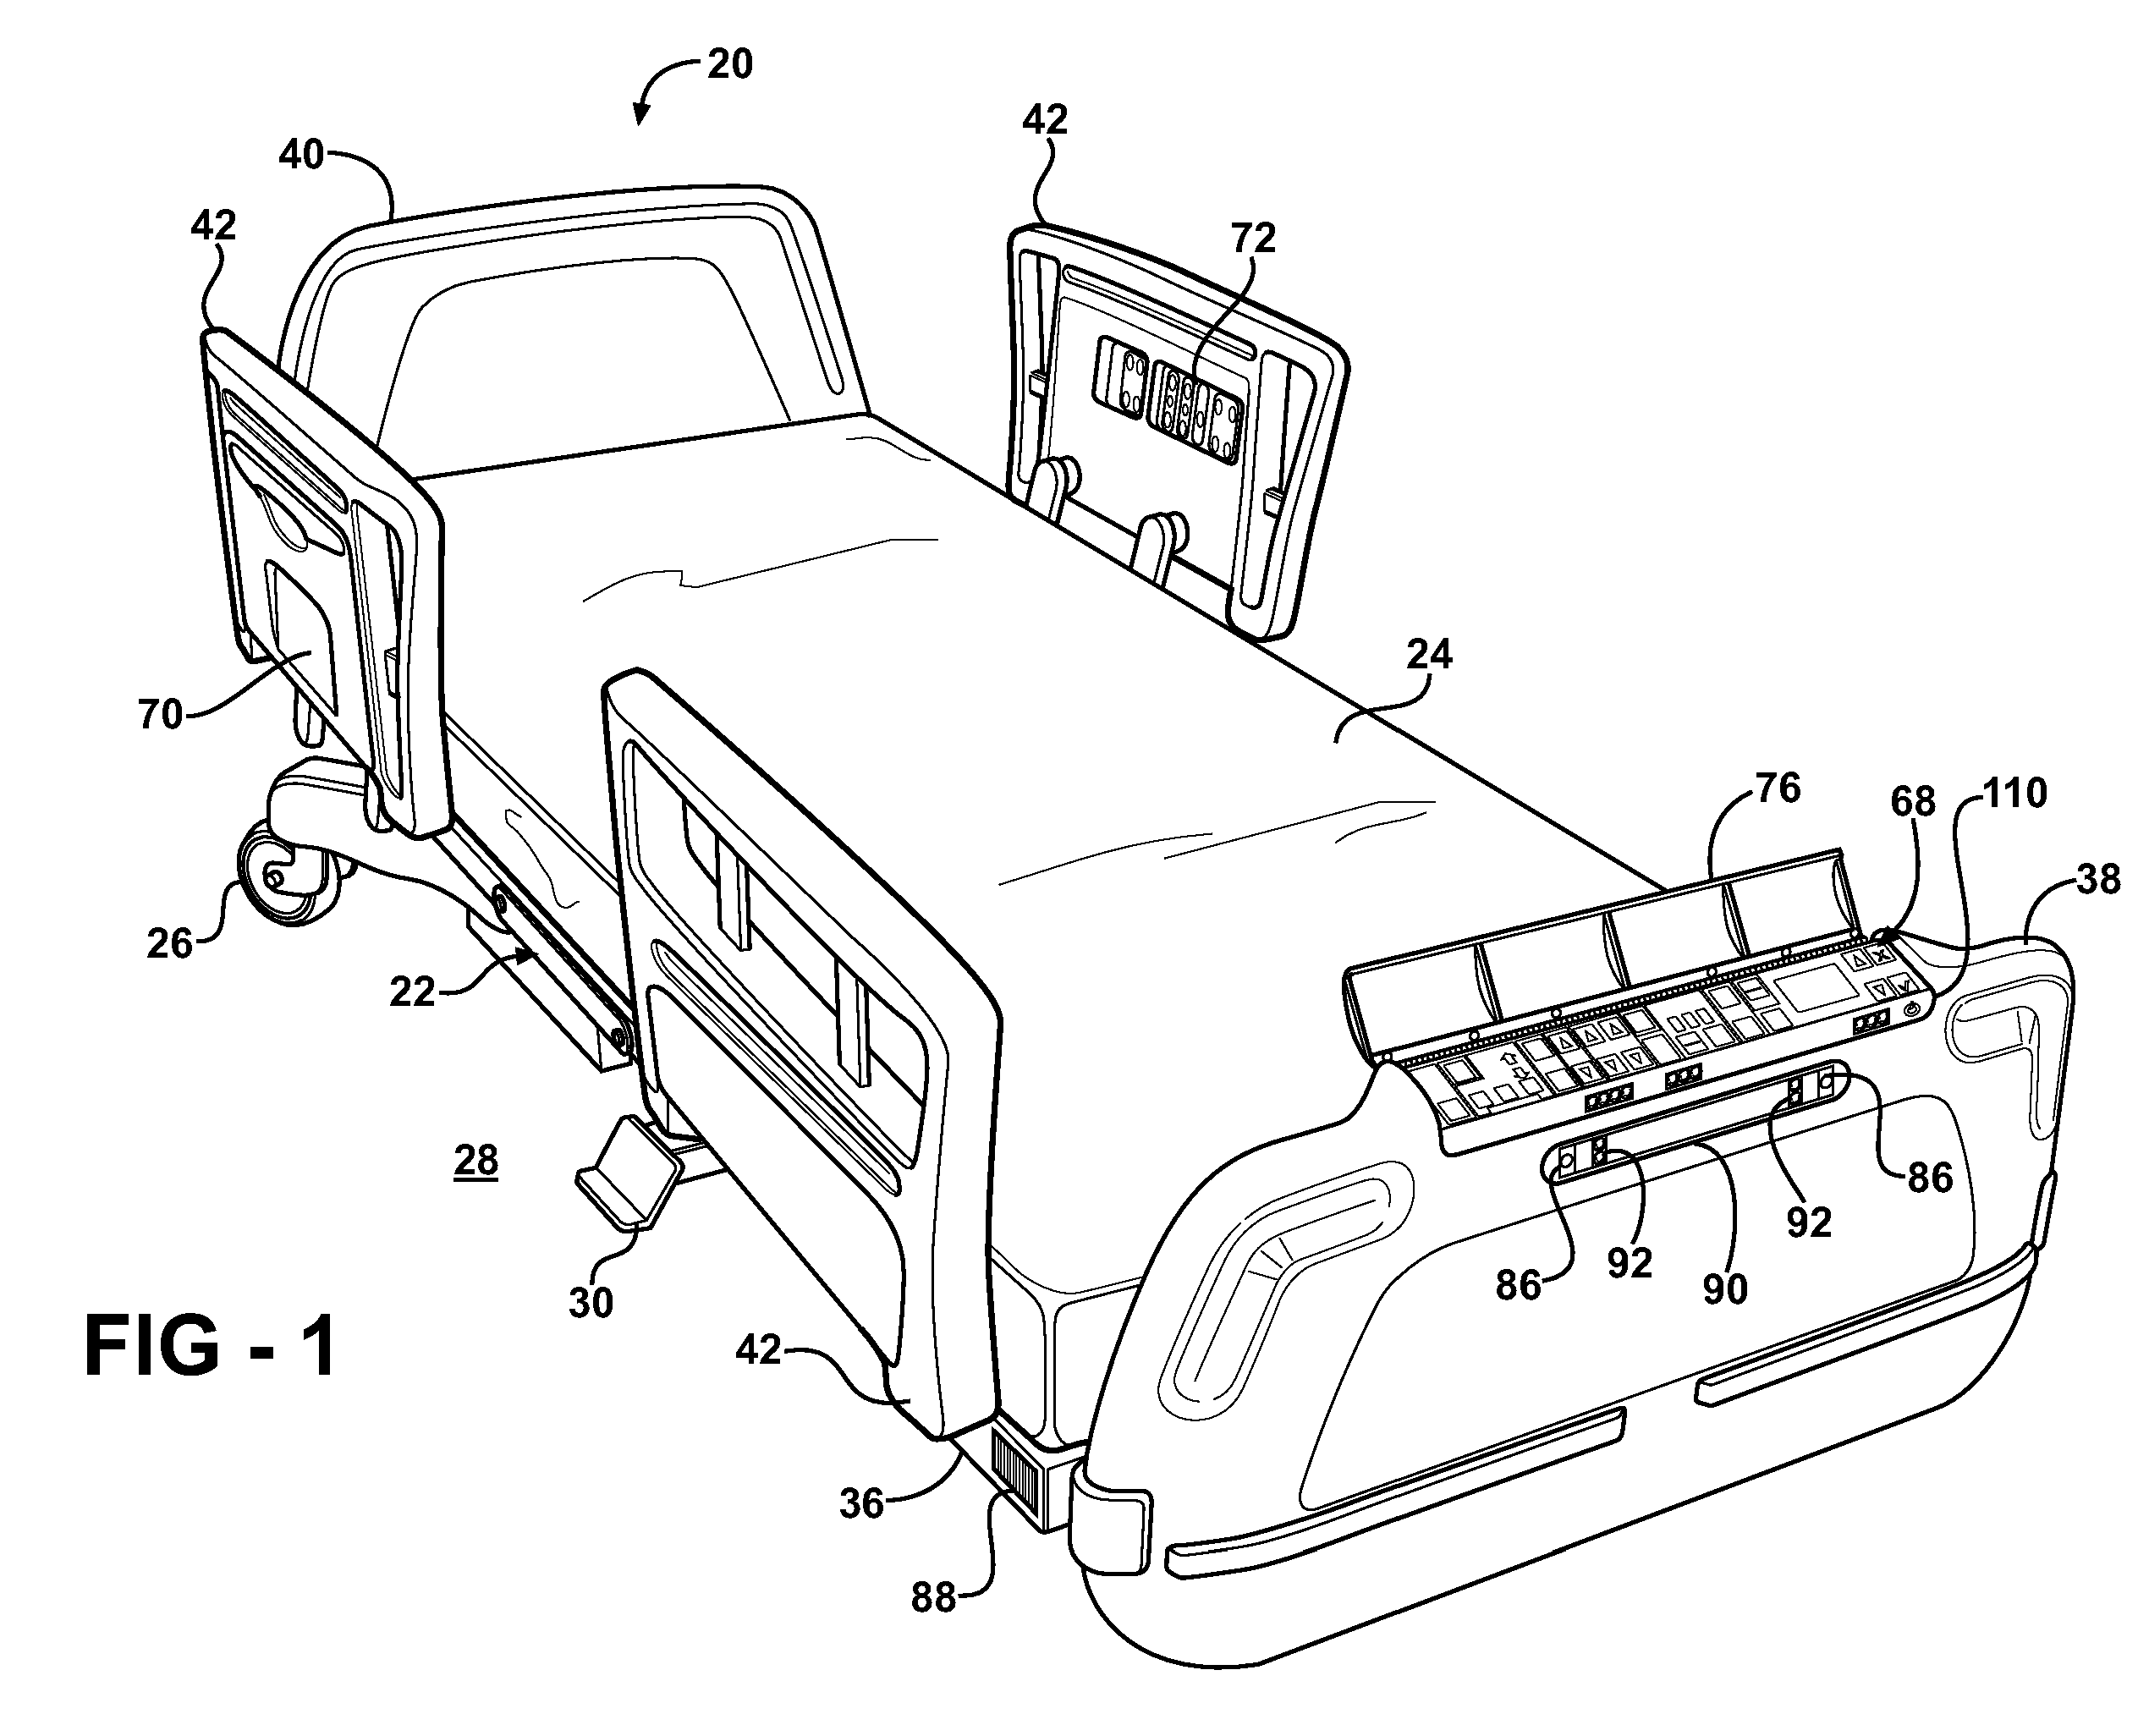 Patient handling device including local status indication, one-touch fowler angle adjustment, and power-on alarm configuration